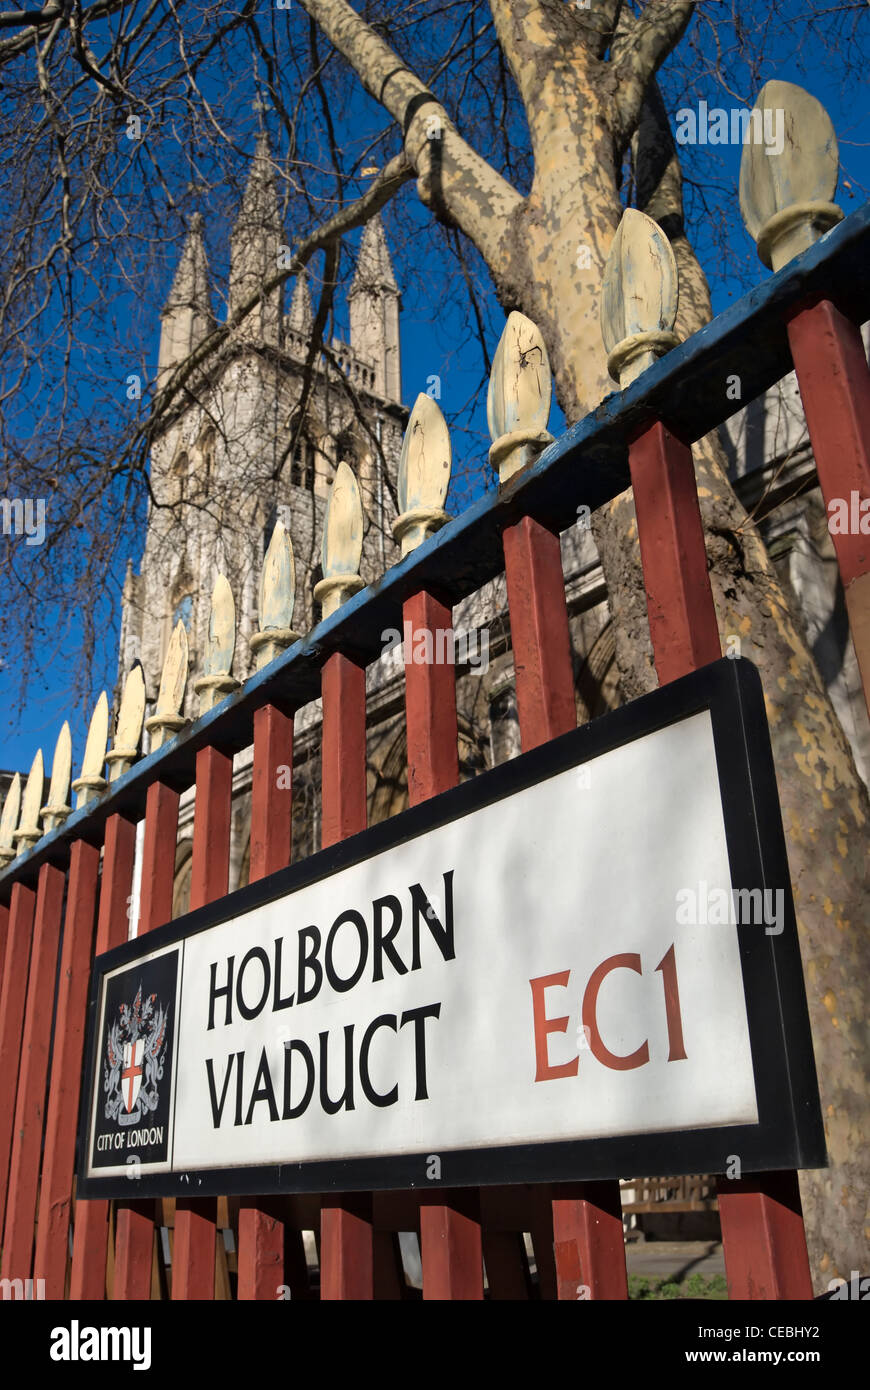 street name sign for holborn viaduct, london, england, the tower of the church of st sepulchre without newgate in background Stock Photo